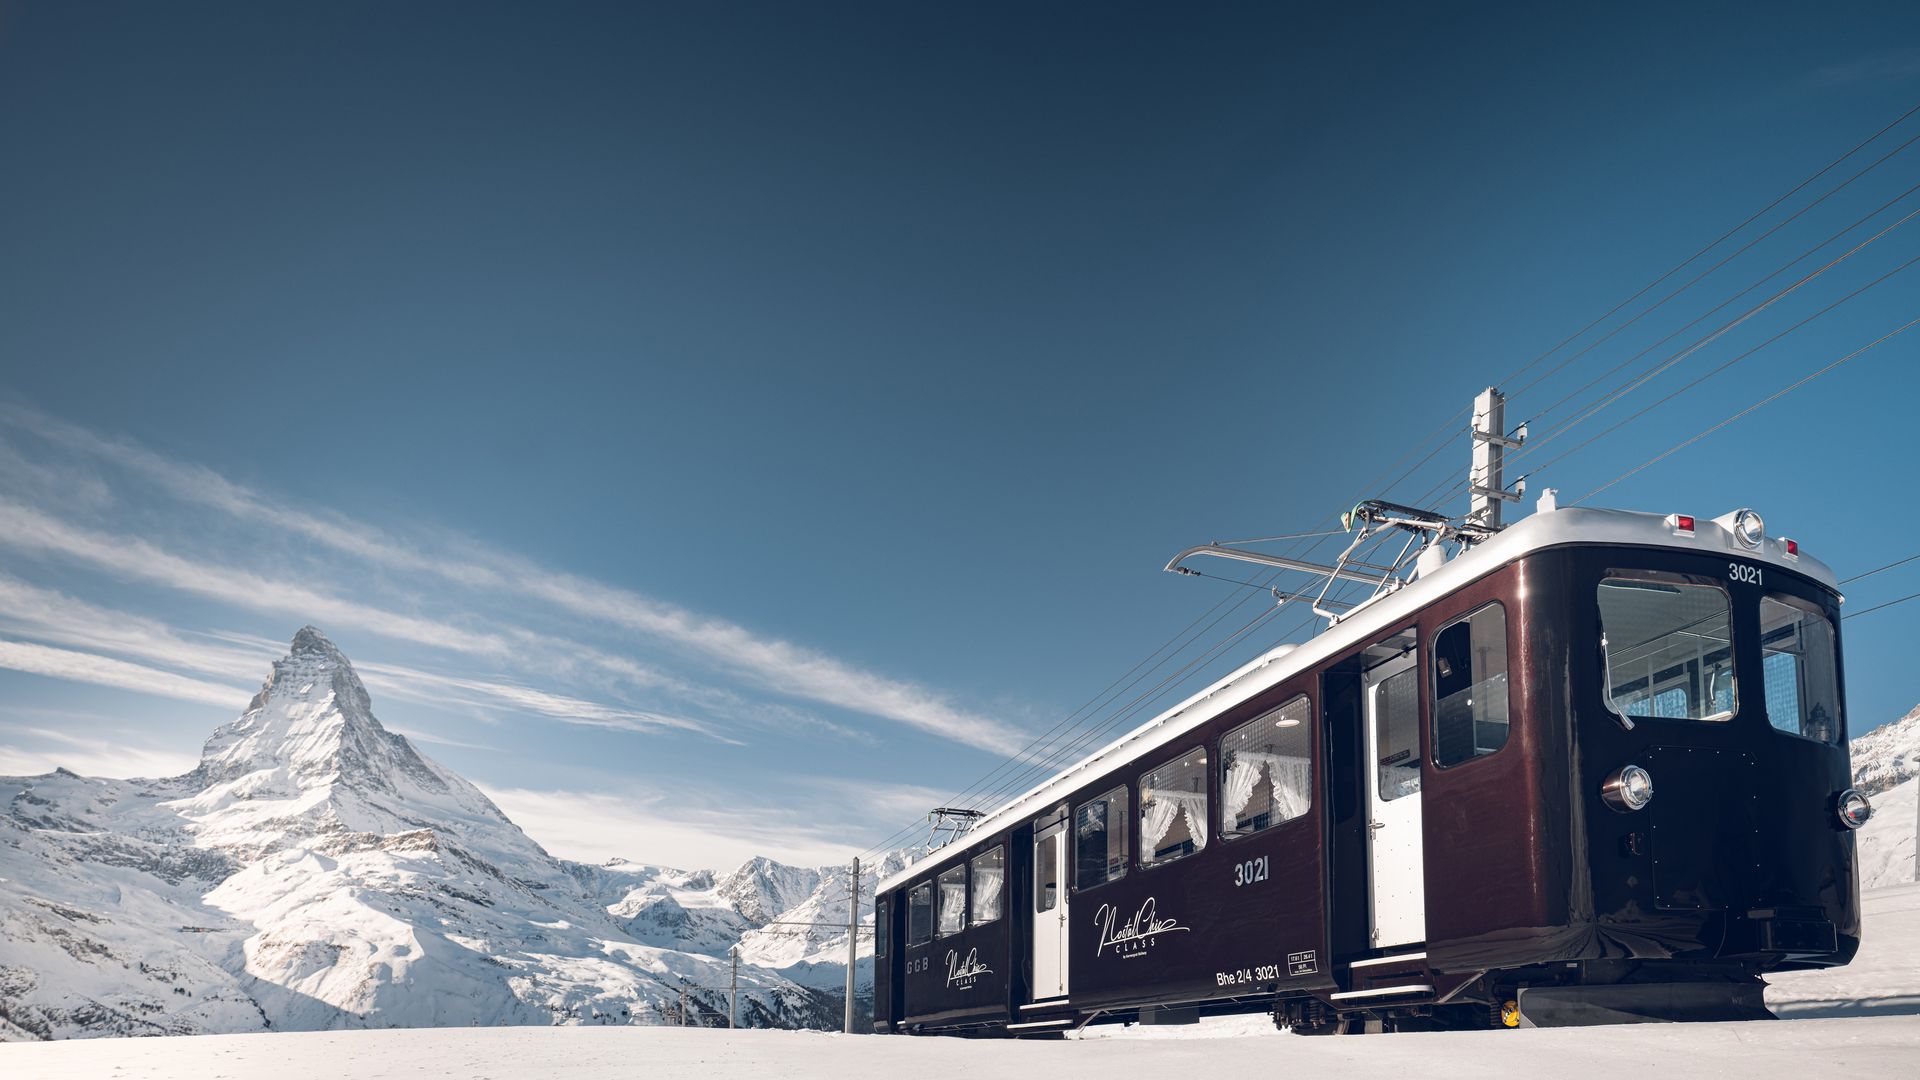 NostalChic Class carriages on the track in winter, view of the Matterhorn